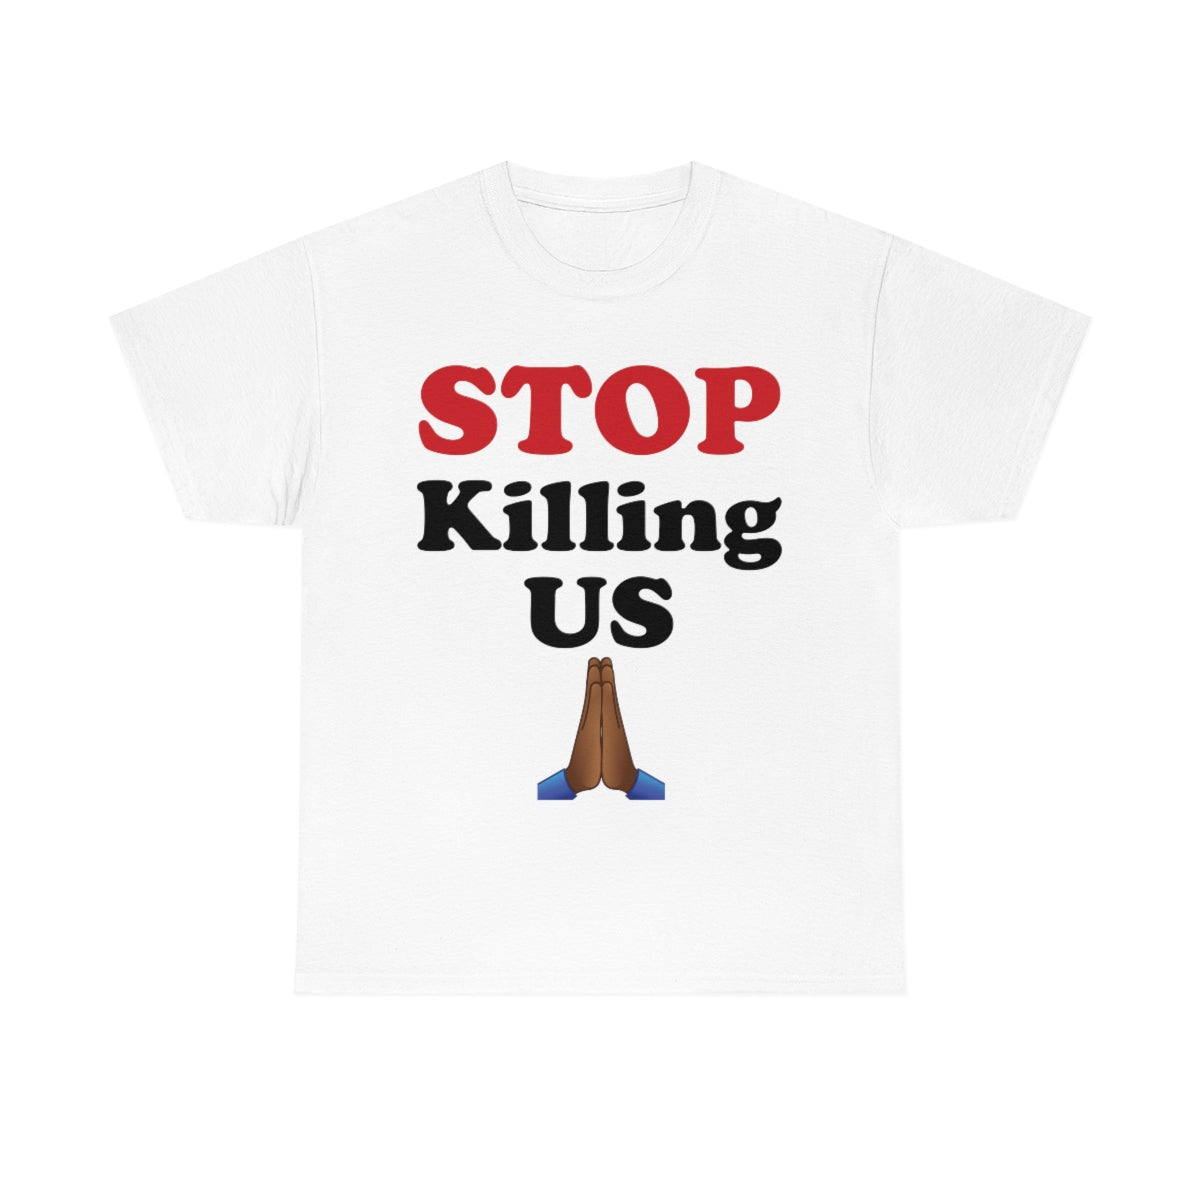 "Stop Killing Us" Unisex T-Shirt (Available in White & Gray)